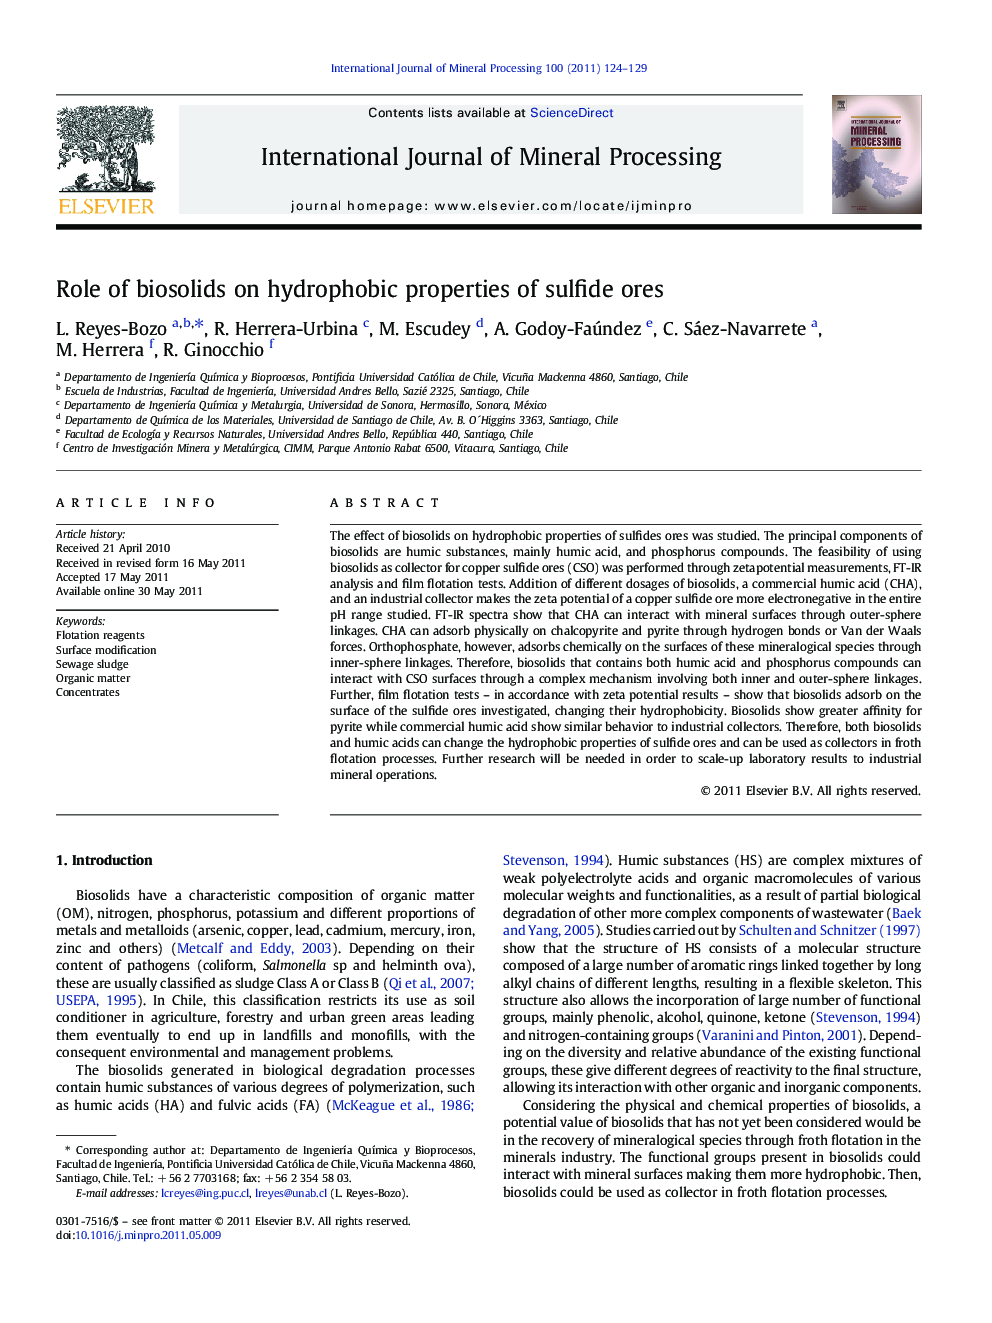 Role of biosolids on hydrophobic properties of sulfide ores